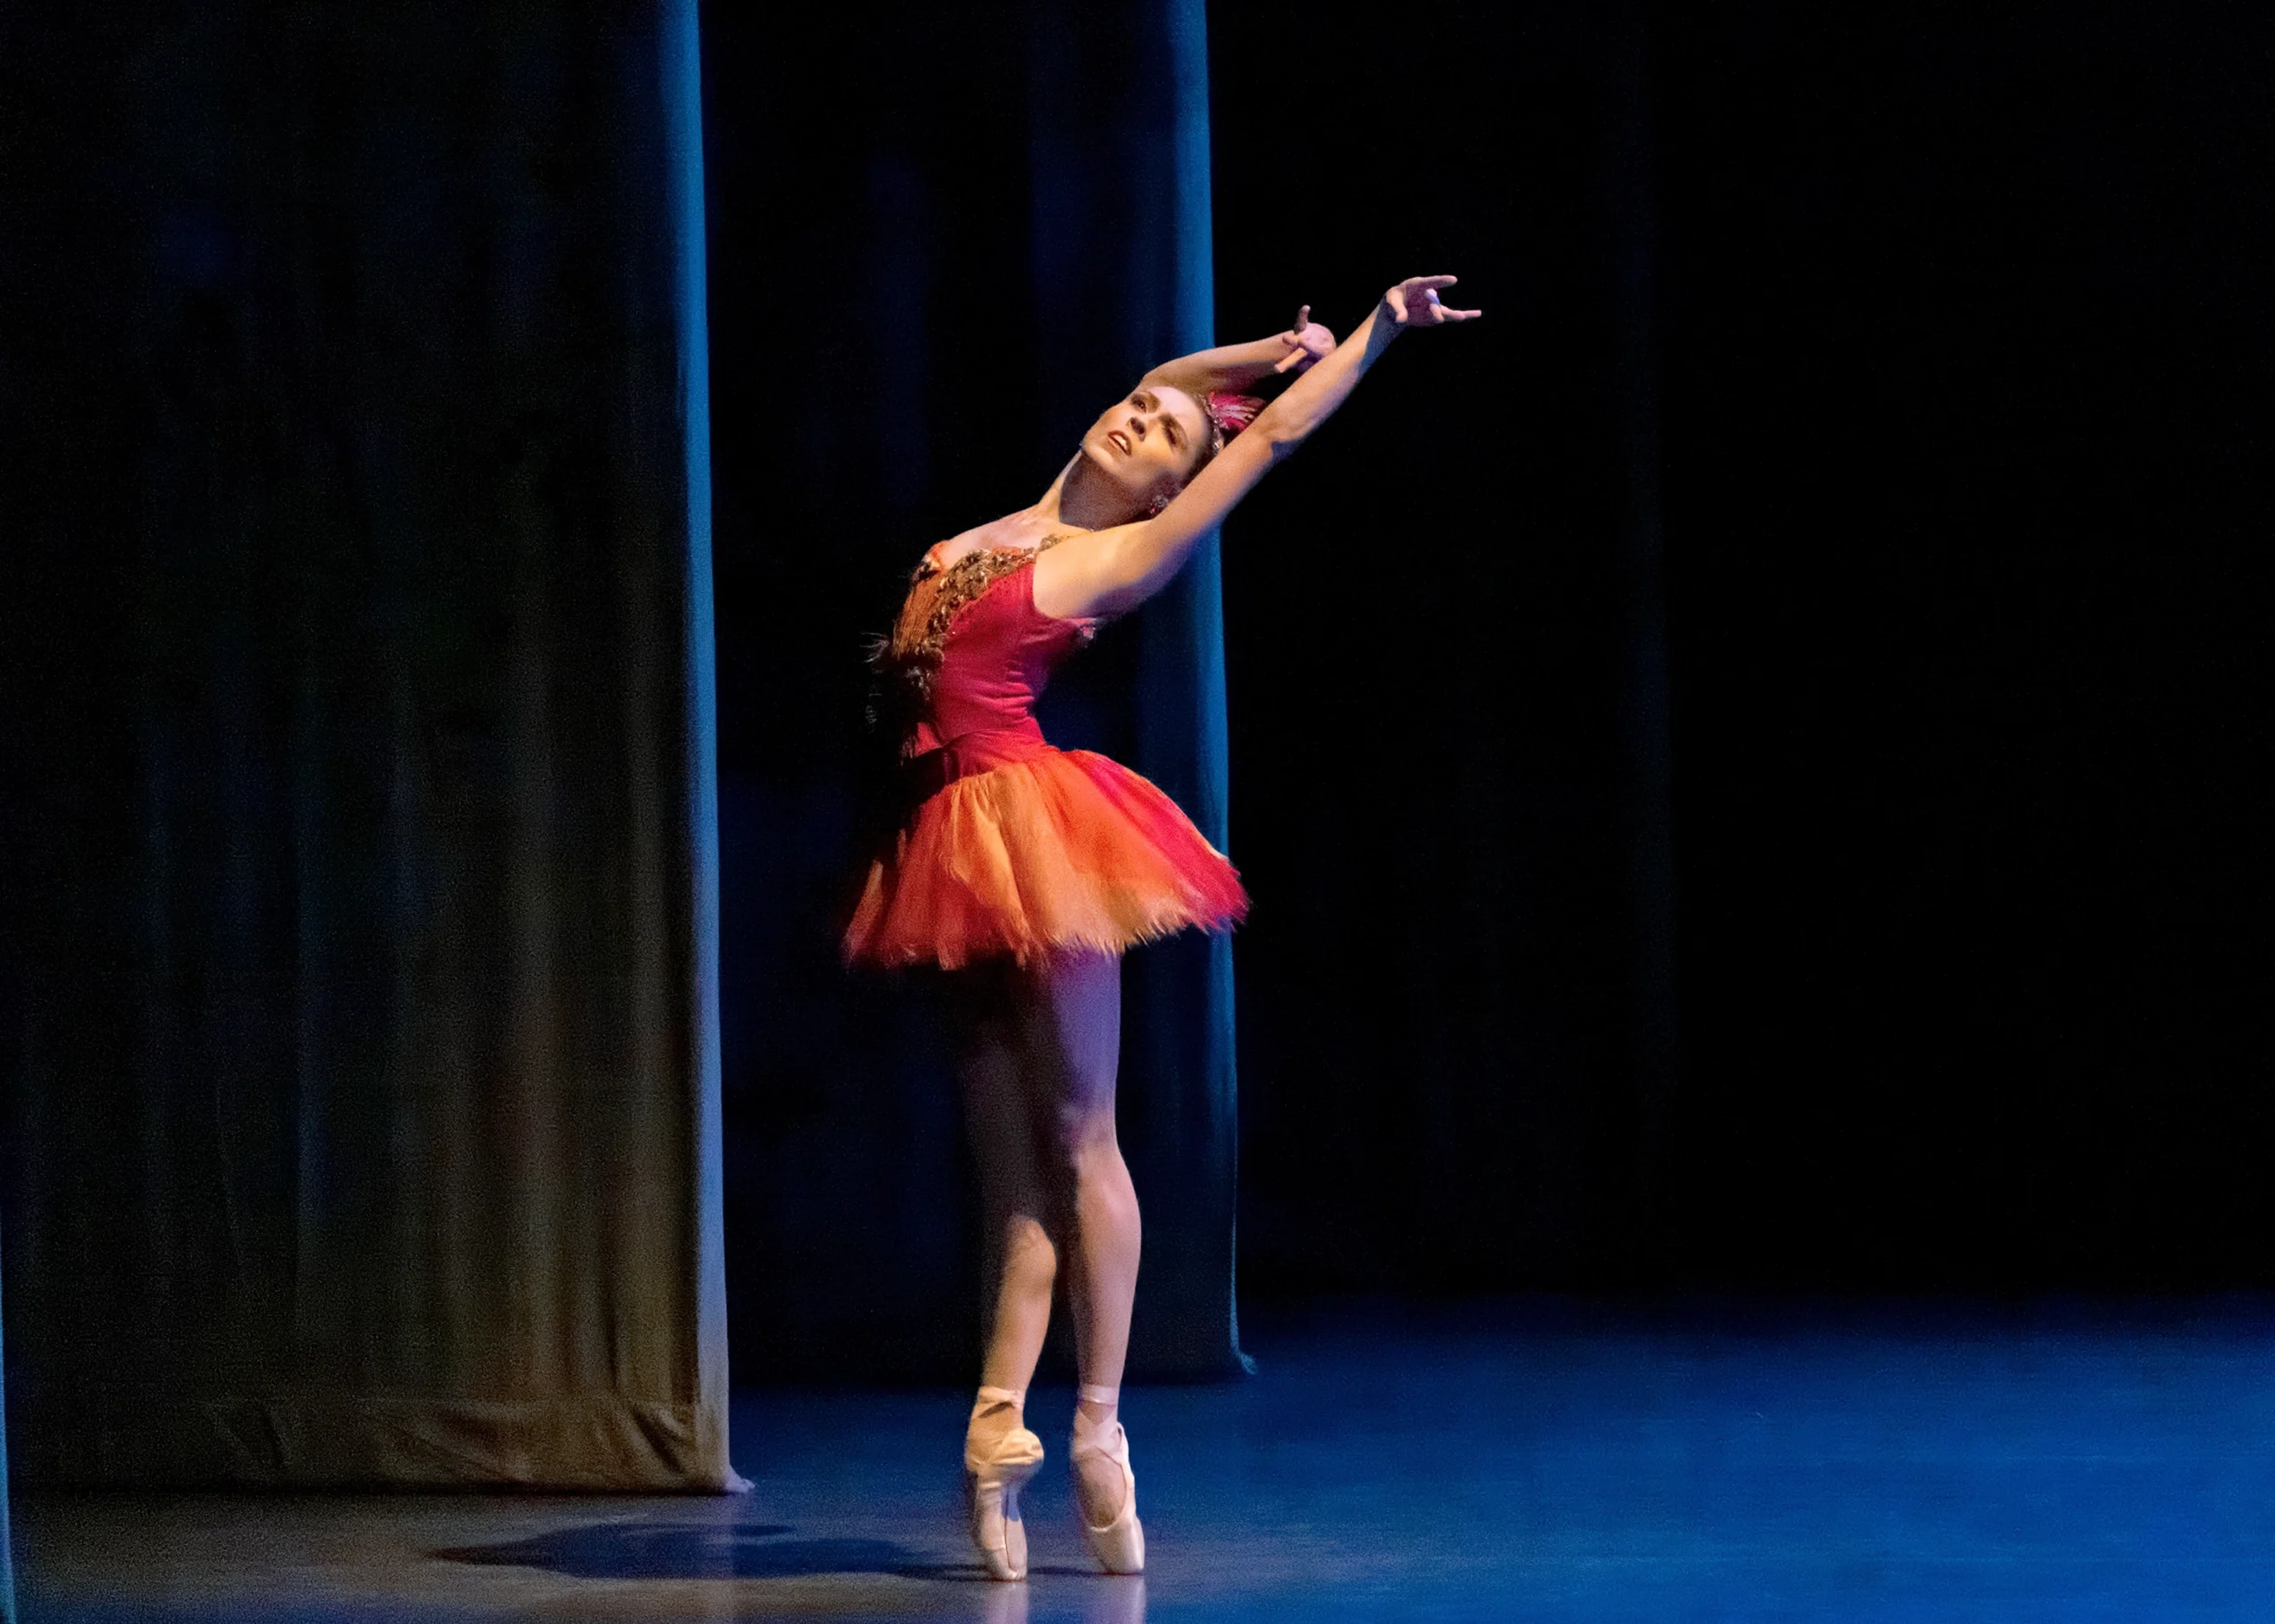 Wearing a short red and gold tutu, Isabella LeFreniere poses in sus-sous effacé on pointe during a performance of Firebird. She stands close to the wings on stage right and lifts her arms high over her head, sweeping them to the left and arching her upper back.